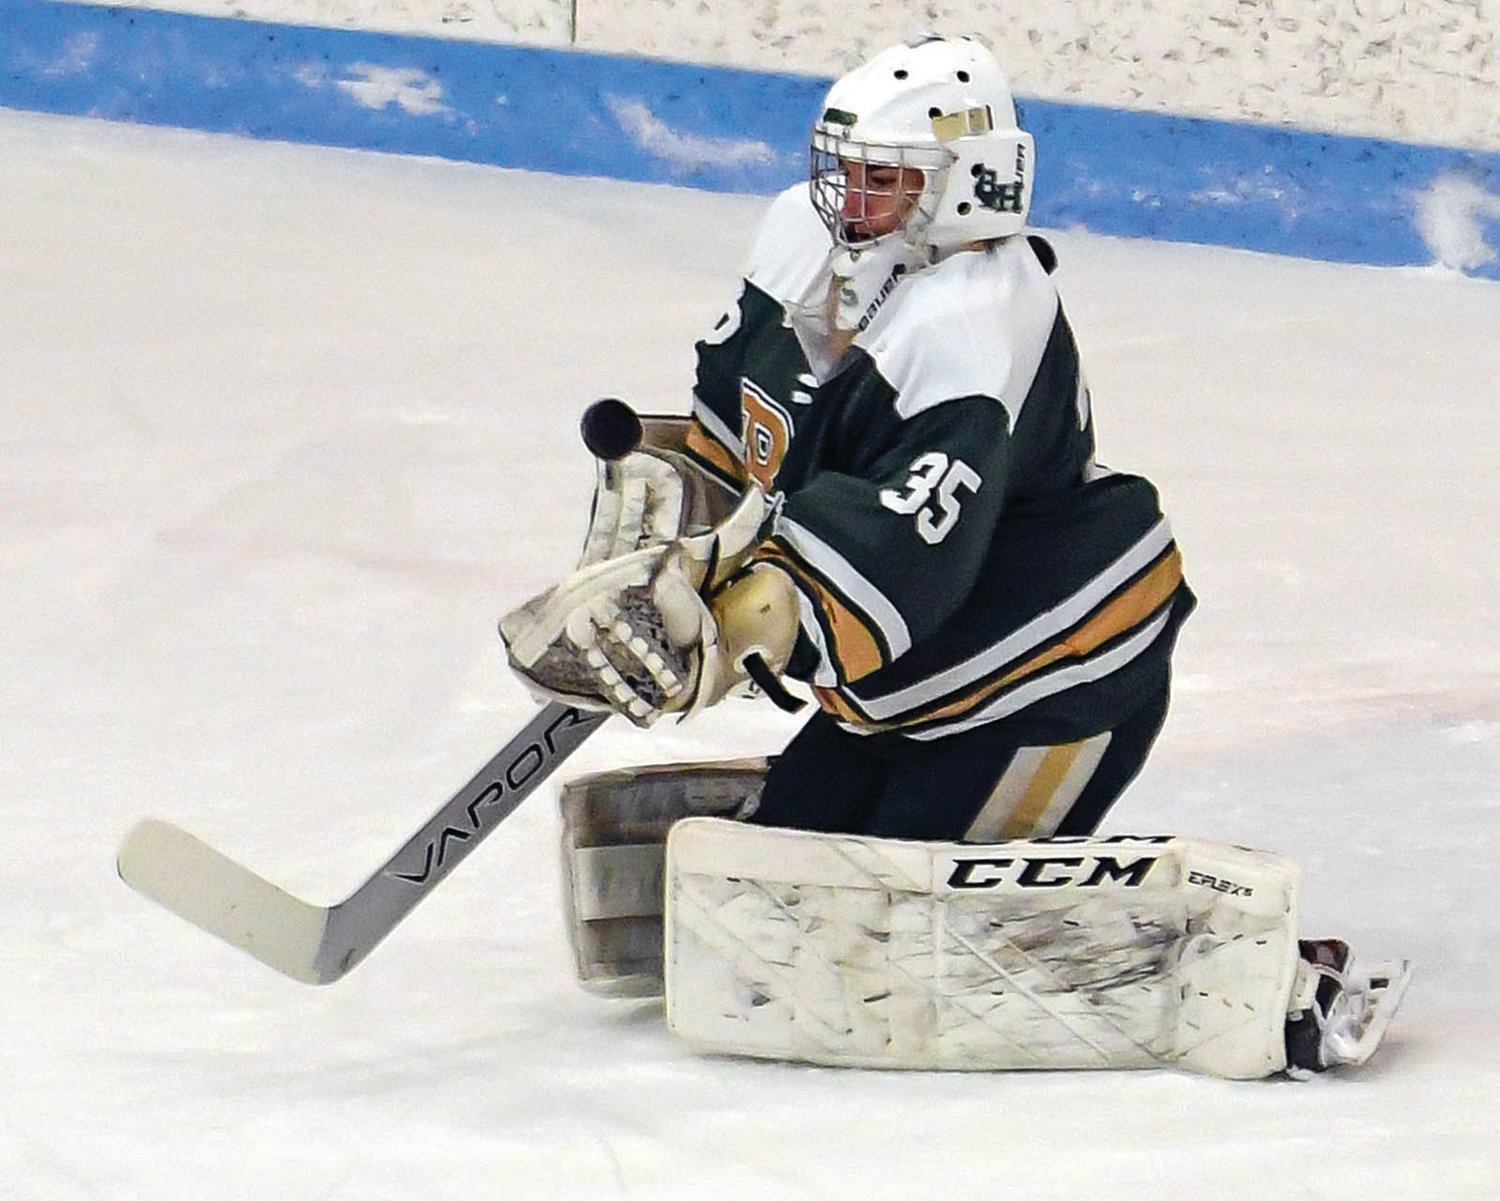 IN NET: Bishop Hendricken
goalie Andrew Carr makes
a save against Mount St.
Charles in Game 2 of the
Division I Quarterfinals last
week at Thayer Arena. The
Hawks rolled to two straight
wins to punch their ticket
to the semis against topseeded
La Salle Academy.